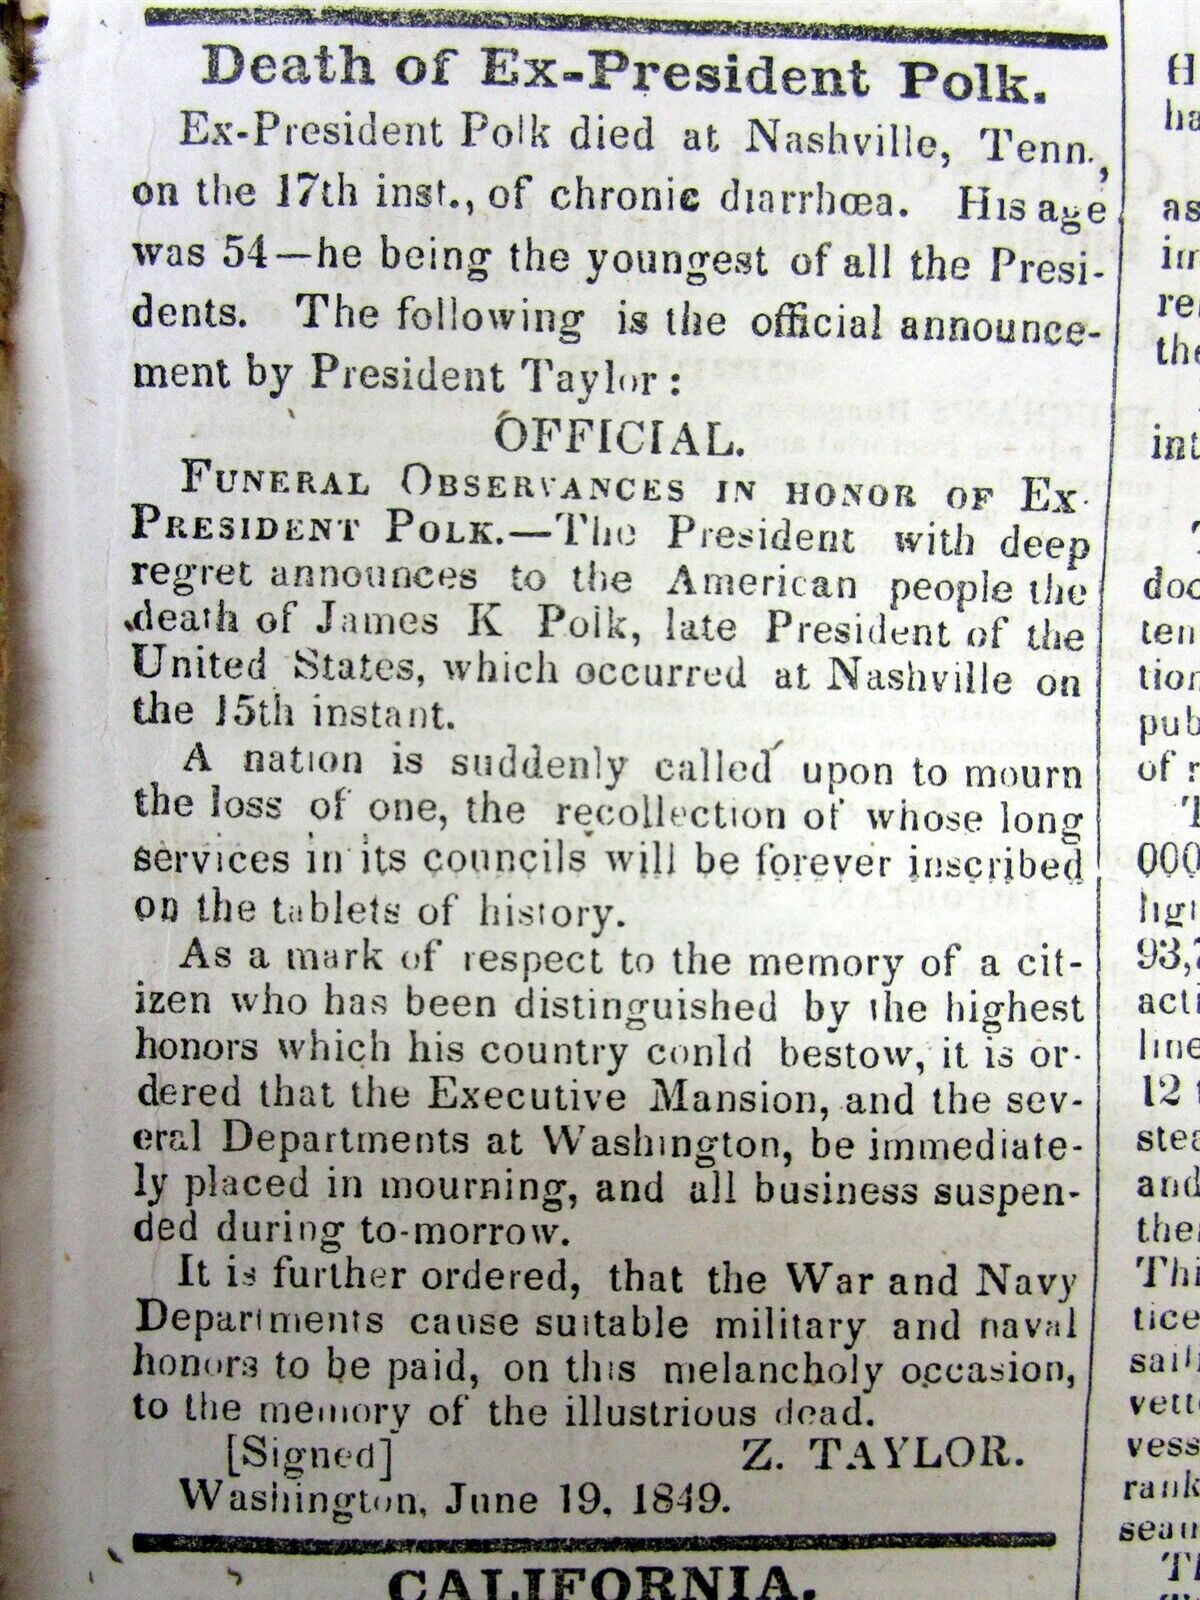 1849 newspaper with DEATH of EX-PRESIDENT JAMES KNOX POLK in NASHVILLE Tennessee